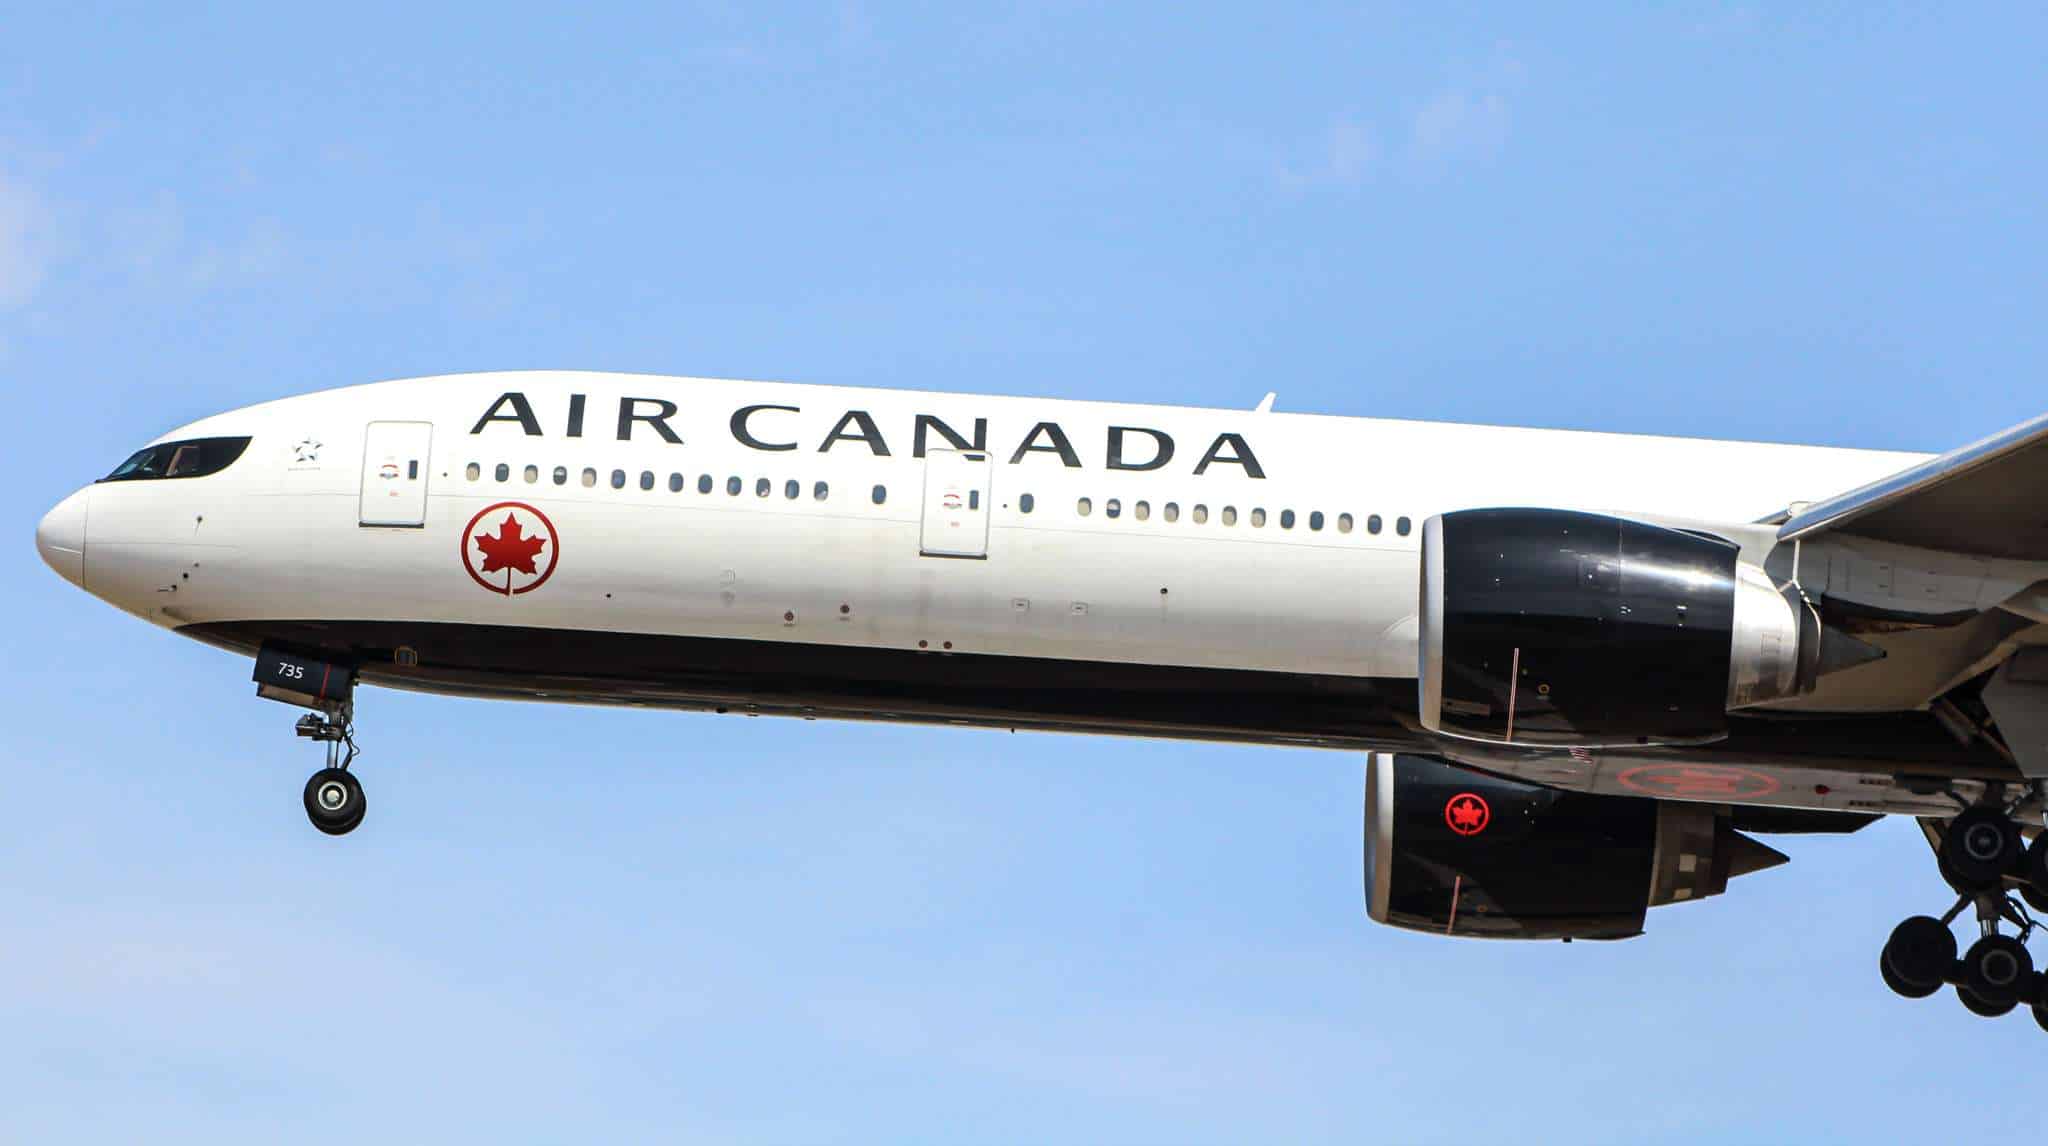 Air Canada Boeing 777 Narrowly Misses Accident at Toronto